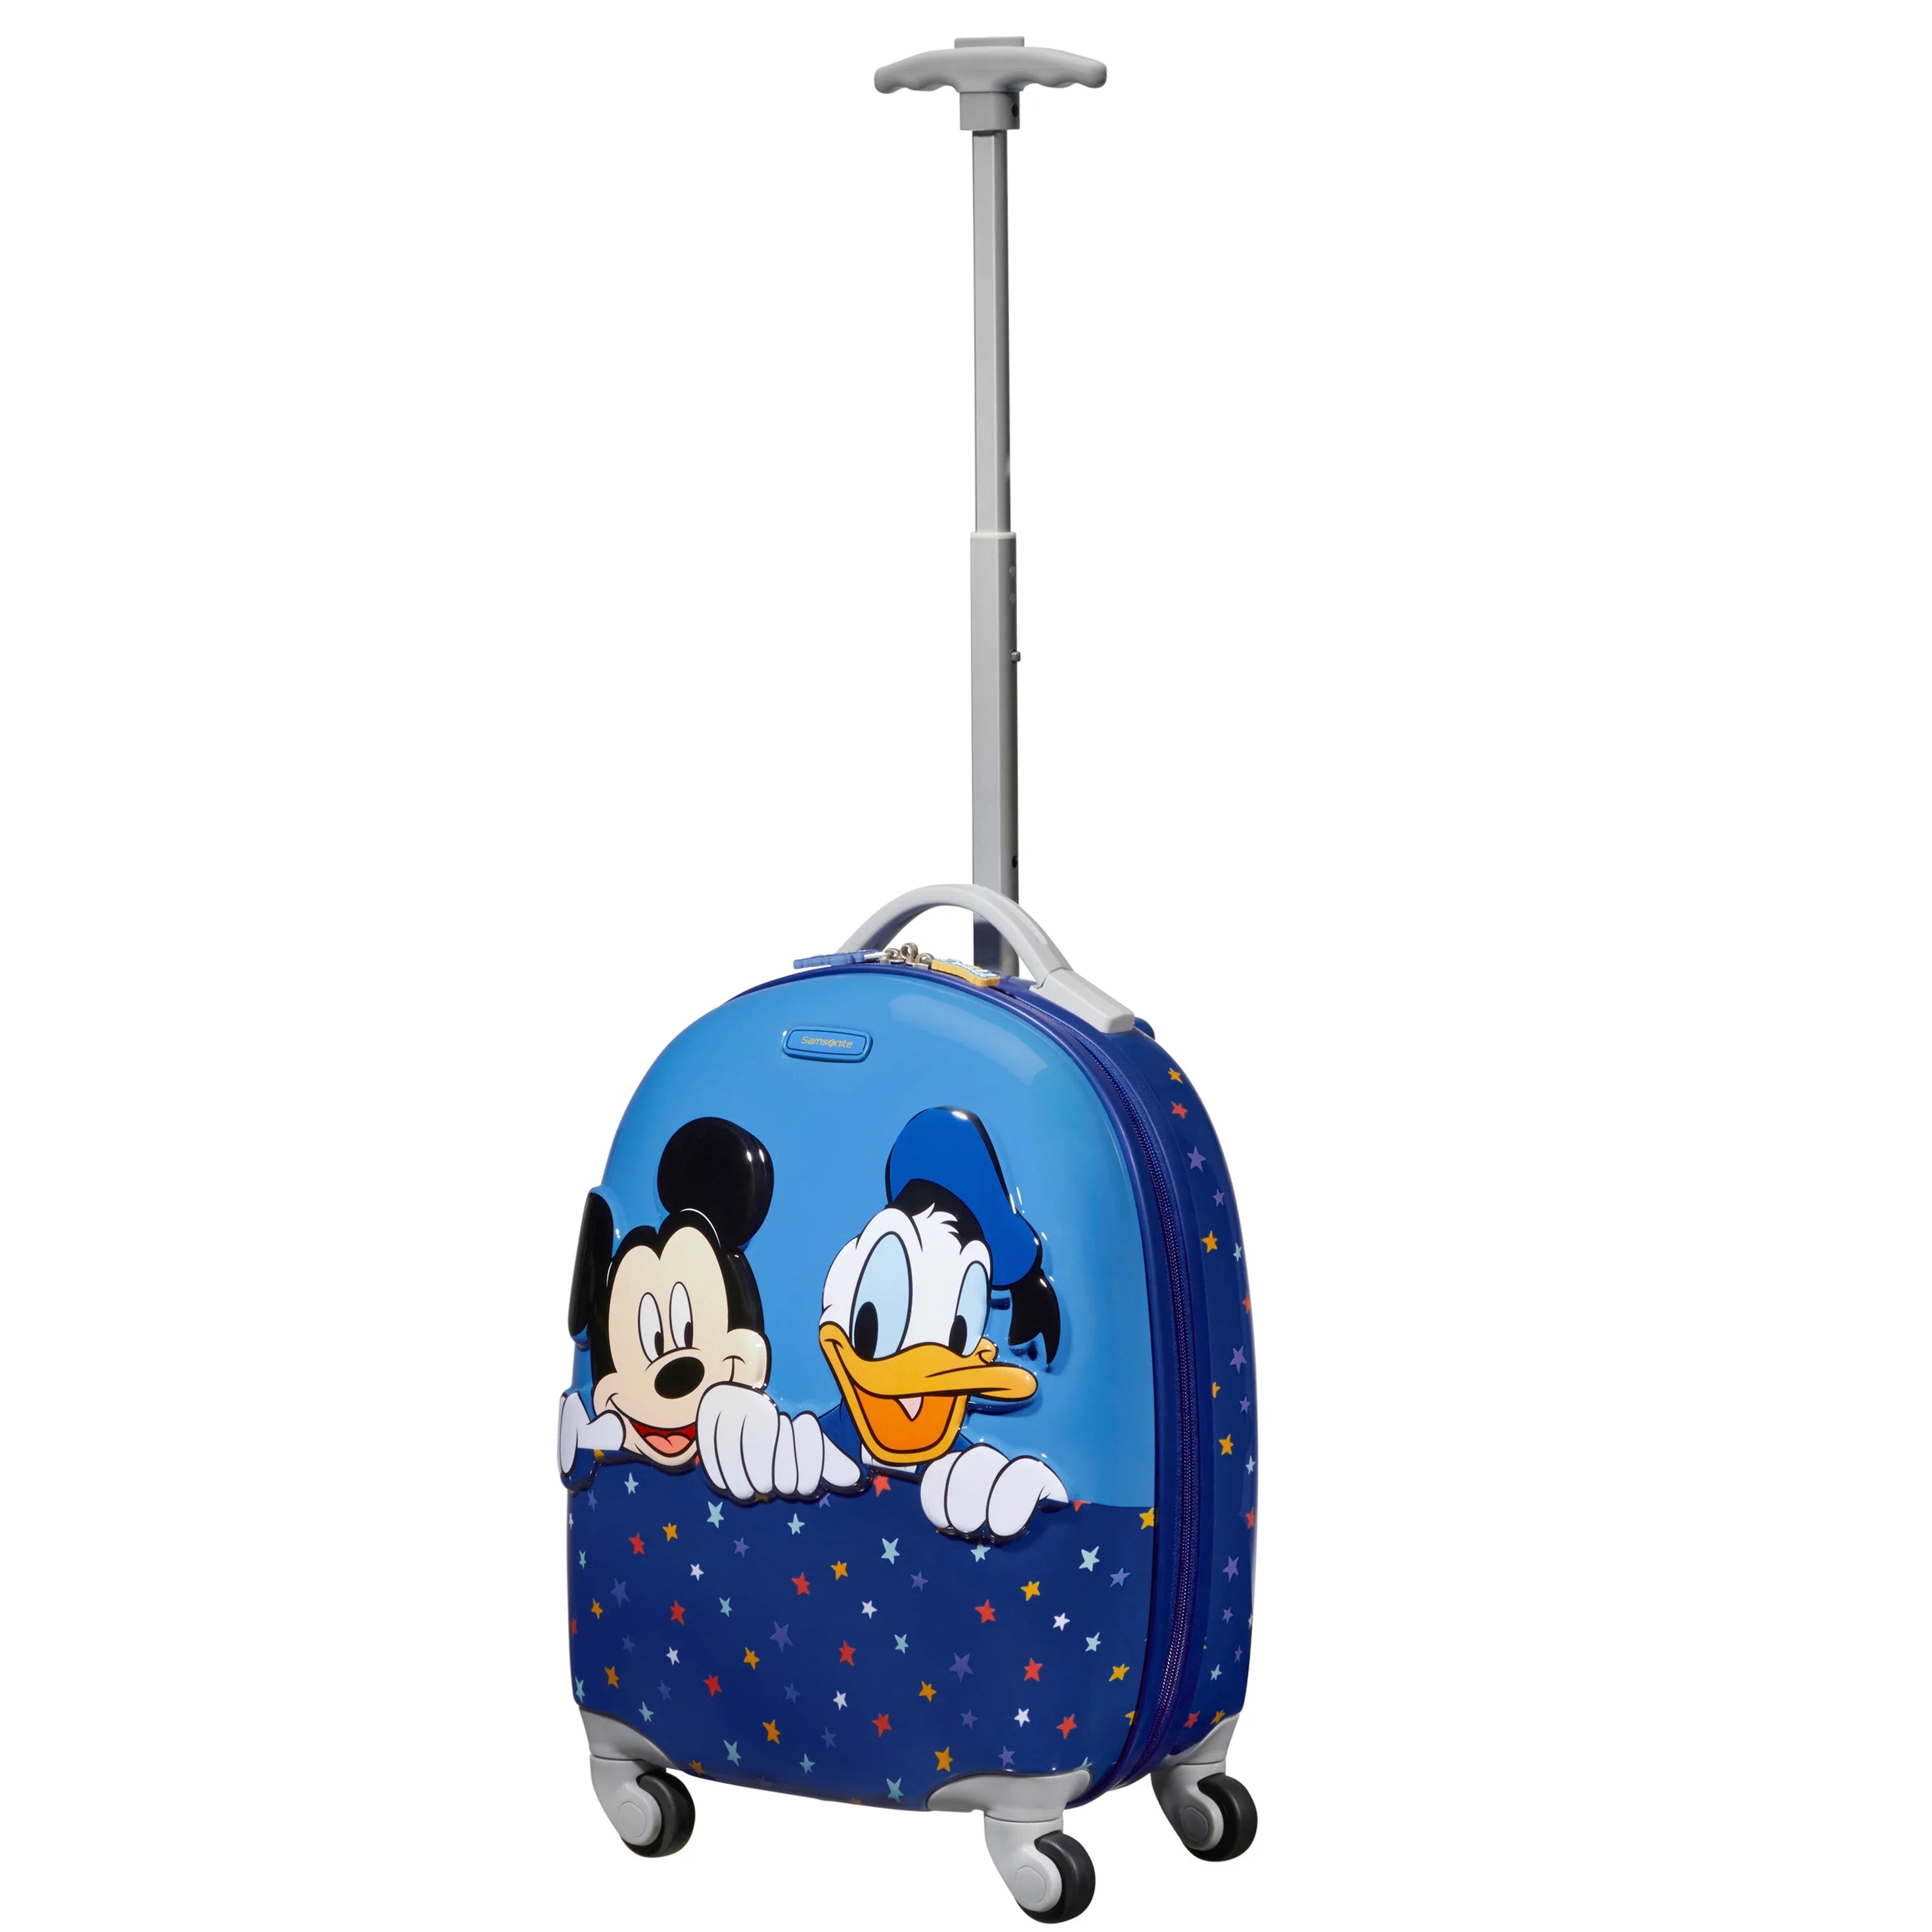 companions 2.0 Sweet Ulitmate Disney travel - and for leisure